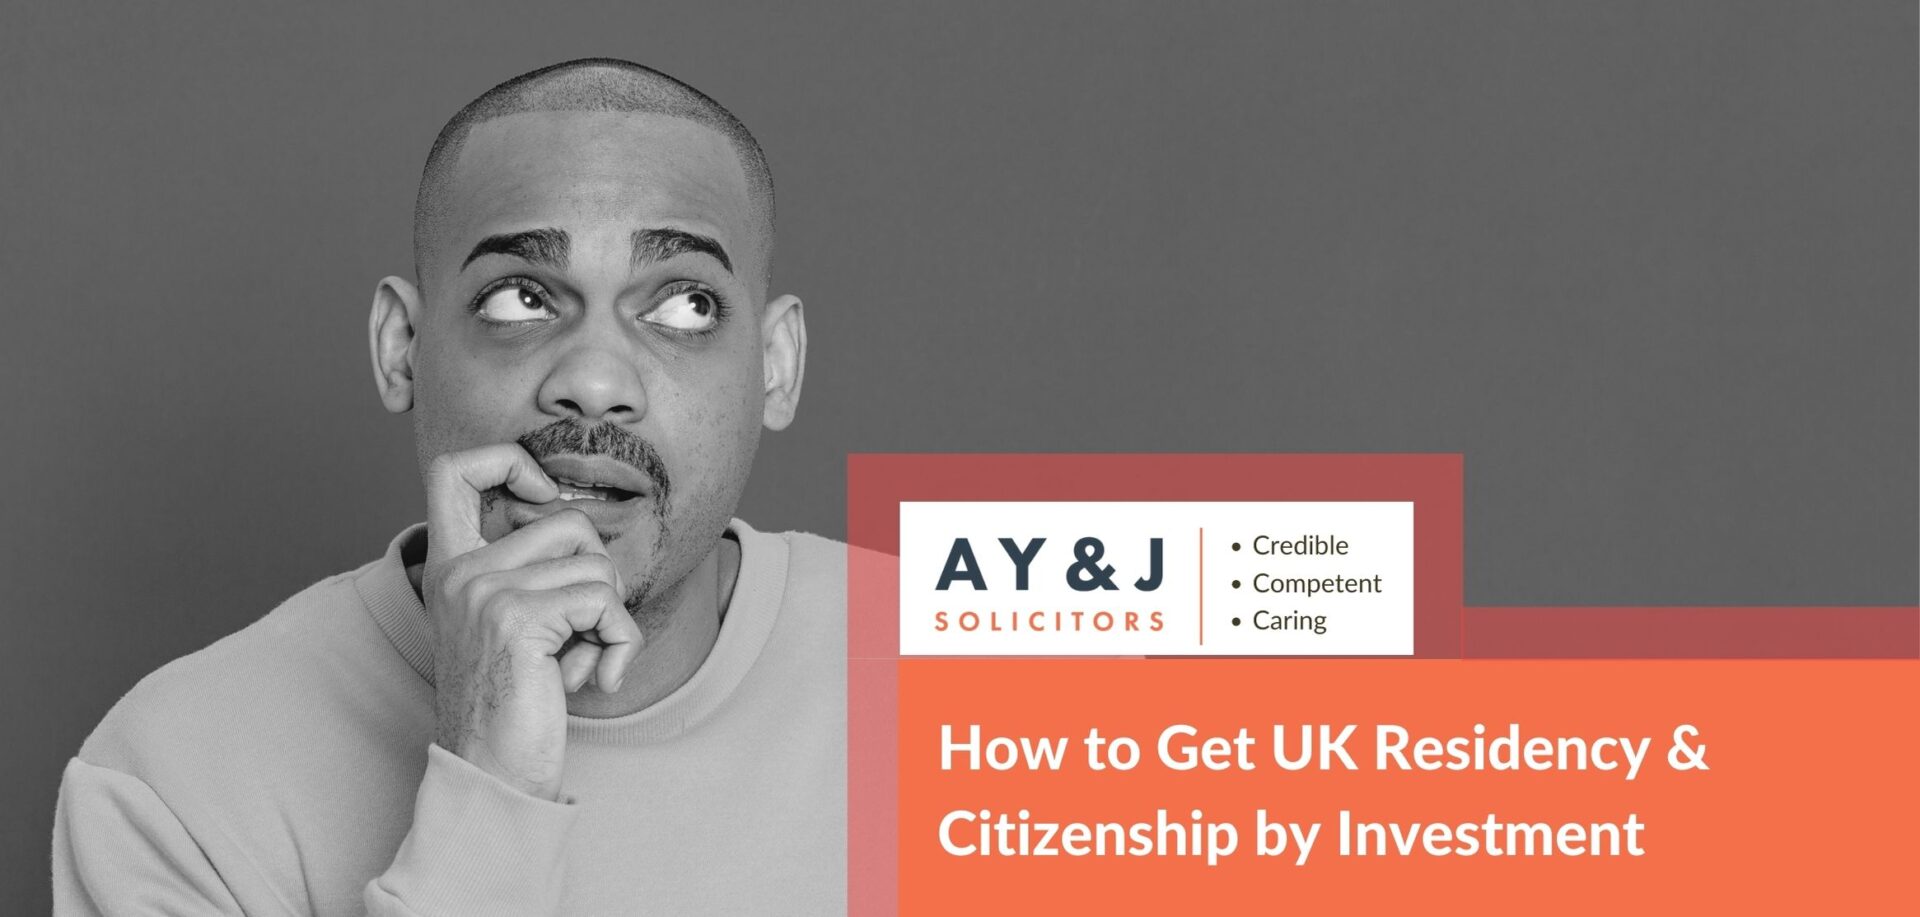 How to Get UK Residency & Citizenship by Investment